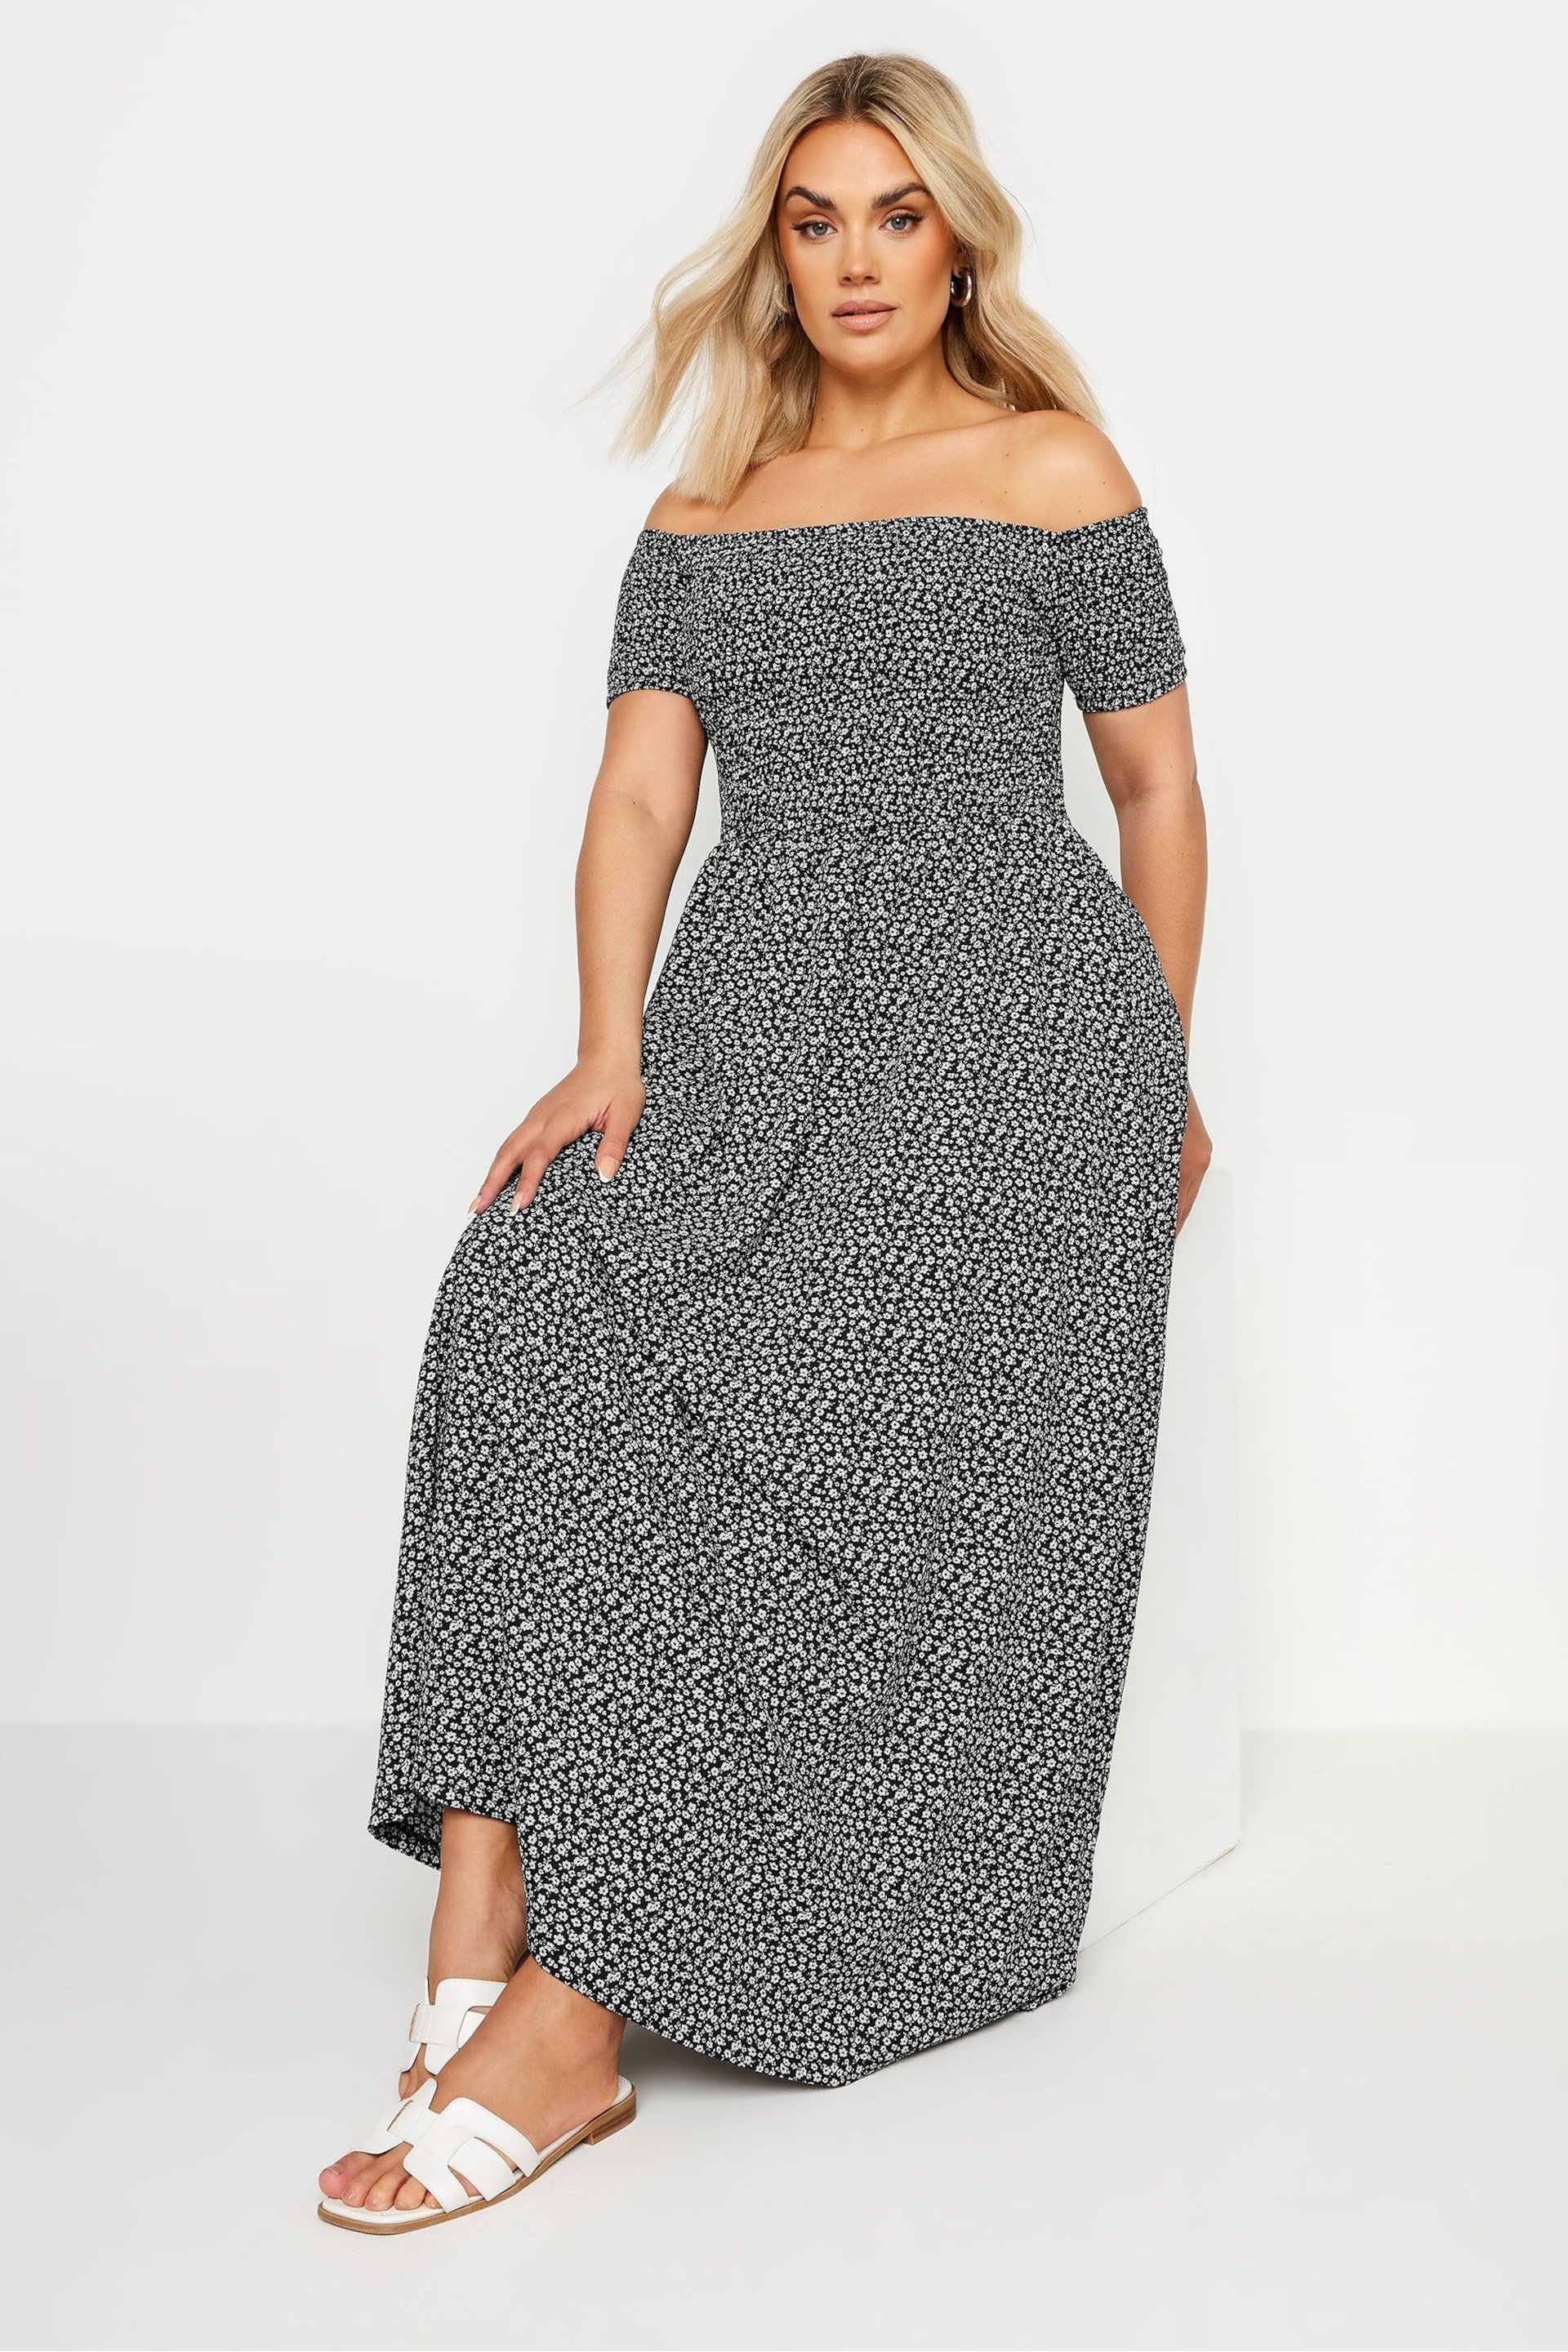 Yours Curve Black Denim Ditsy Shirred Midaxi Dress - Image 2 of 6